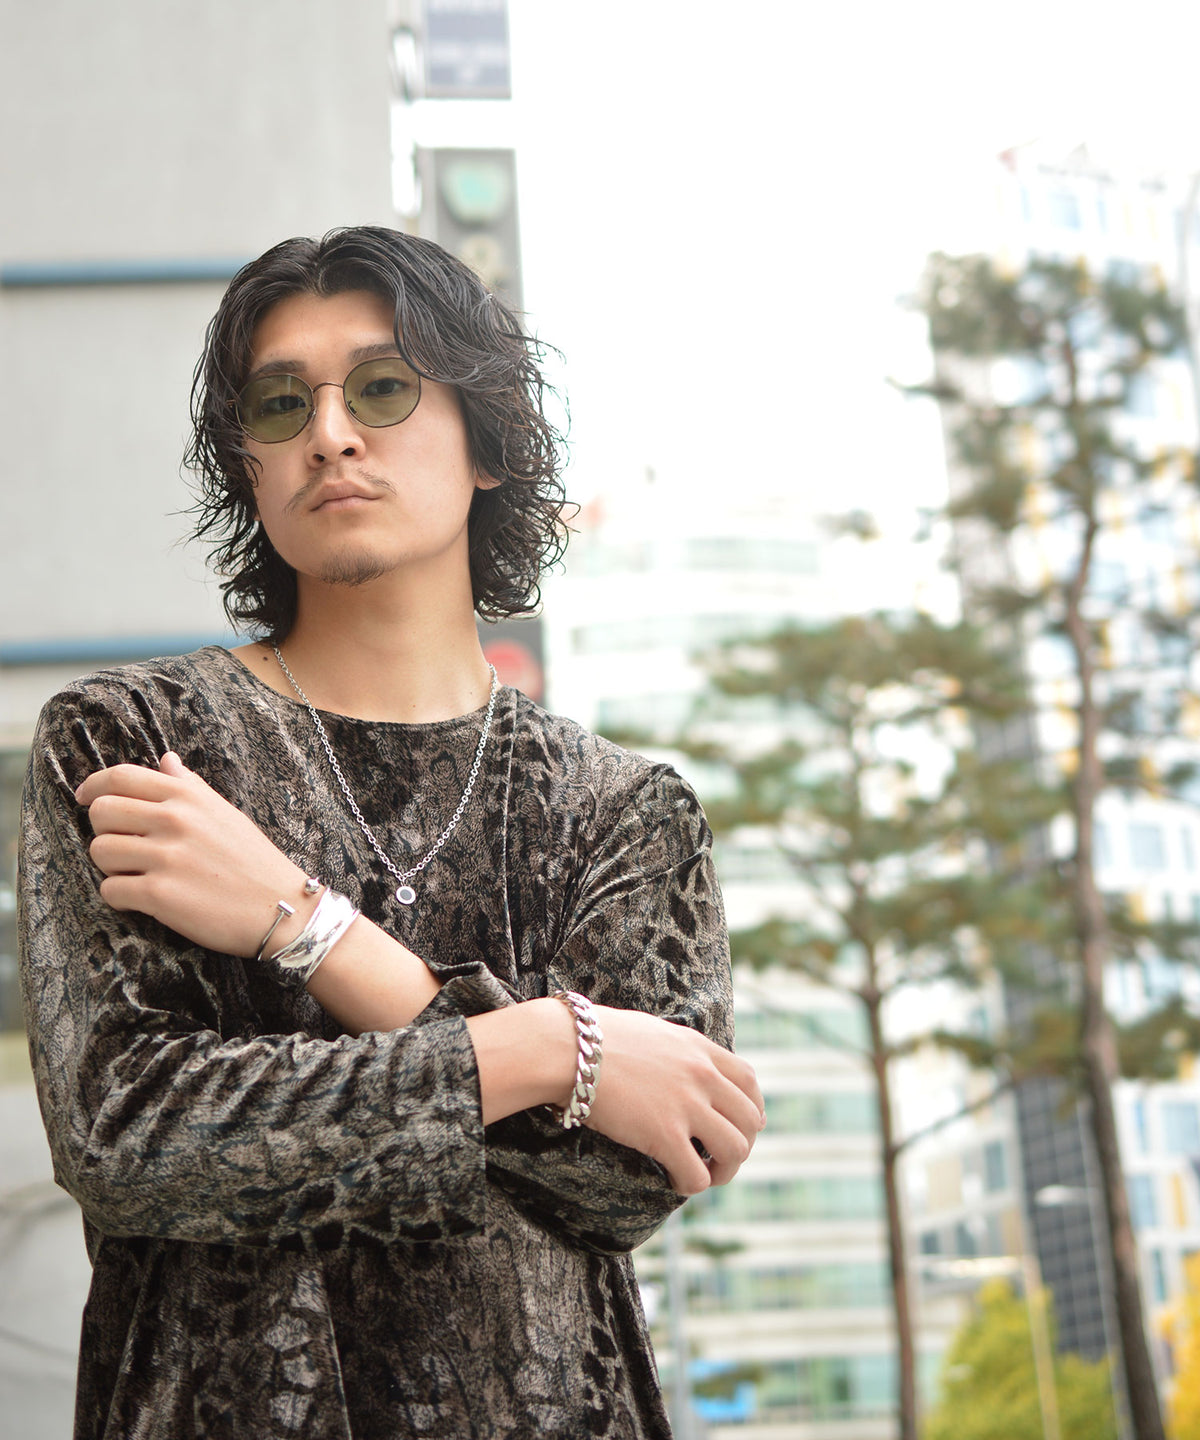 【Takeru. for BROTHERHOOD】Bold Chain Bracelet "Surgical Stainless Steel 316L"-Stainless SILVER